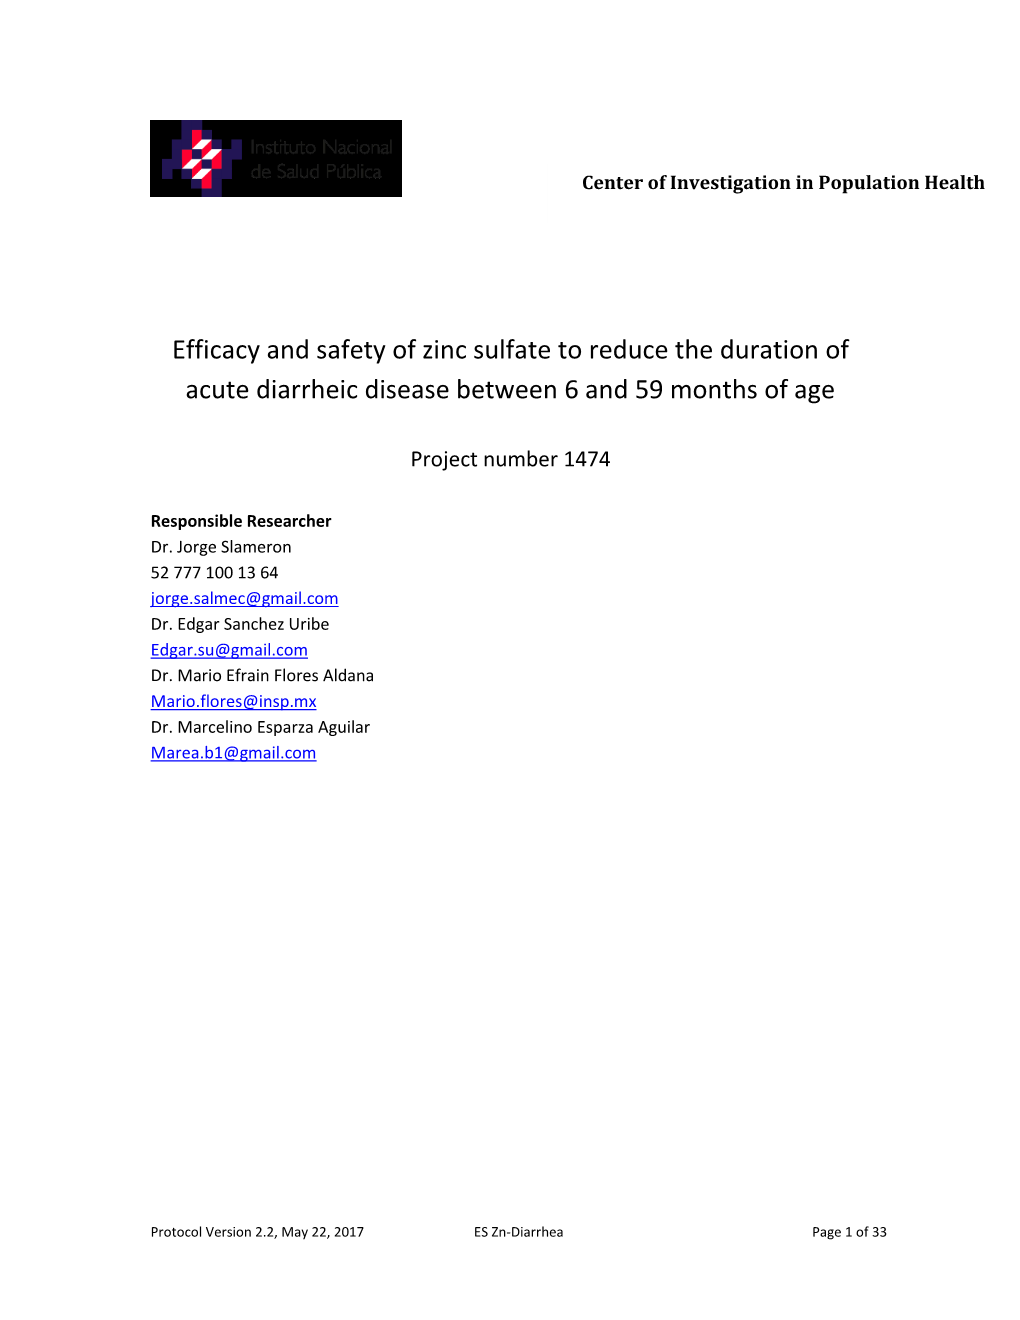 Efficacy and Safety of Zinc Sulfate to Reduce the Duration of Acute Diarrheic Disease Between 6 and 59 Months of Age